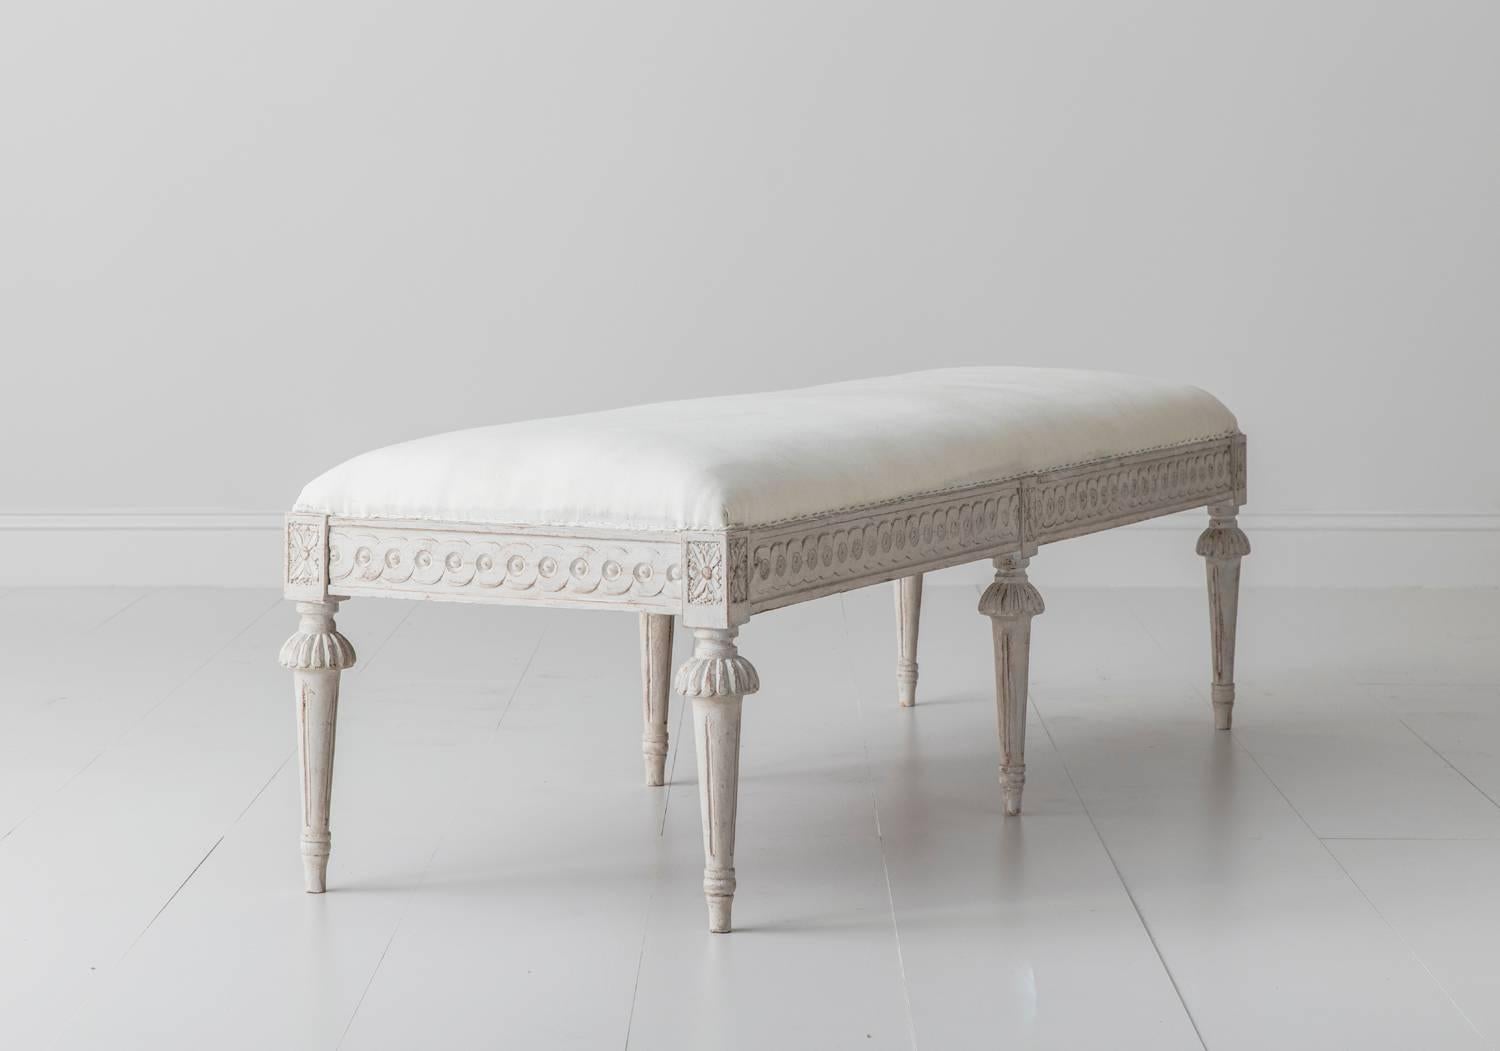 There is also a 'sister' bench available. Please inquire for details. This is a richly carved 19th century Swedish painted long bench in the Gustavian style. There is a carved guilloche pattern on the seat frame and carved rosettes above fluted,